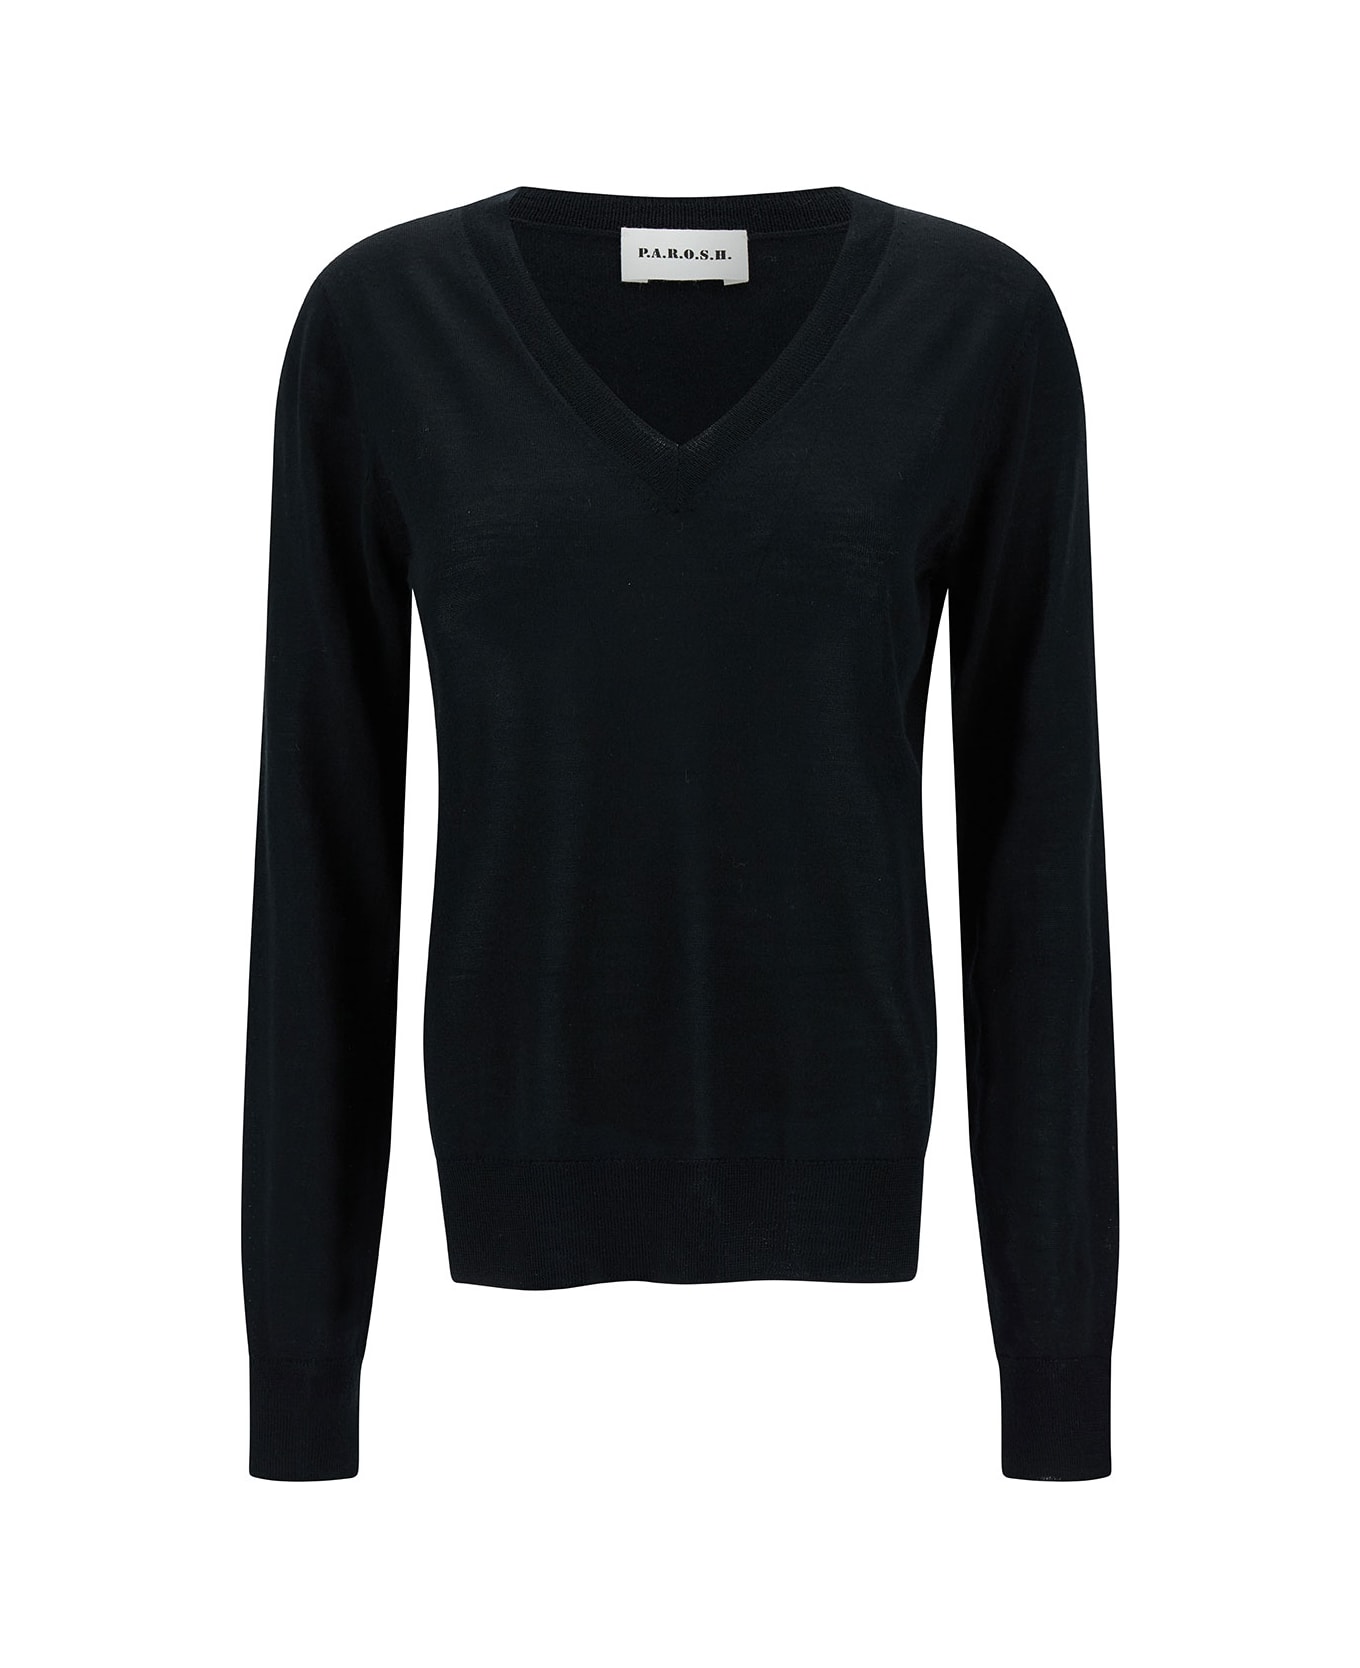 Parosh Black Pullover With V Neckline And Ribbed Trim In Wool And Silk Blend Woman - Black ニットウェア